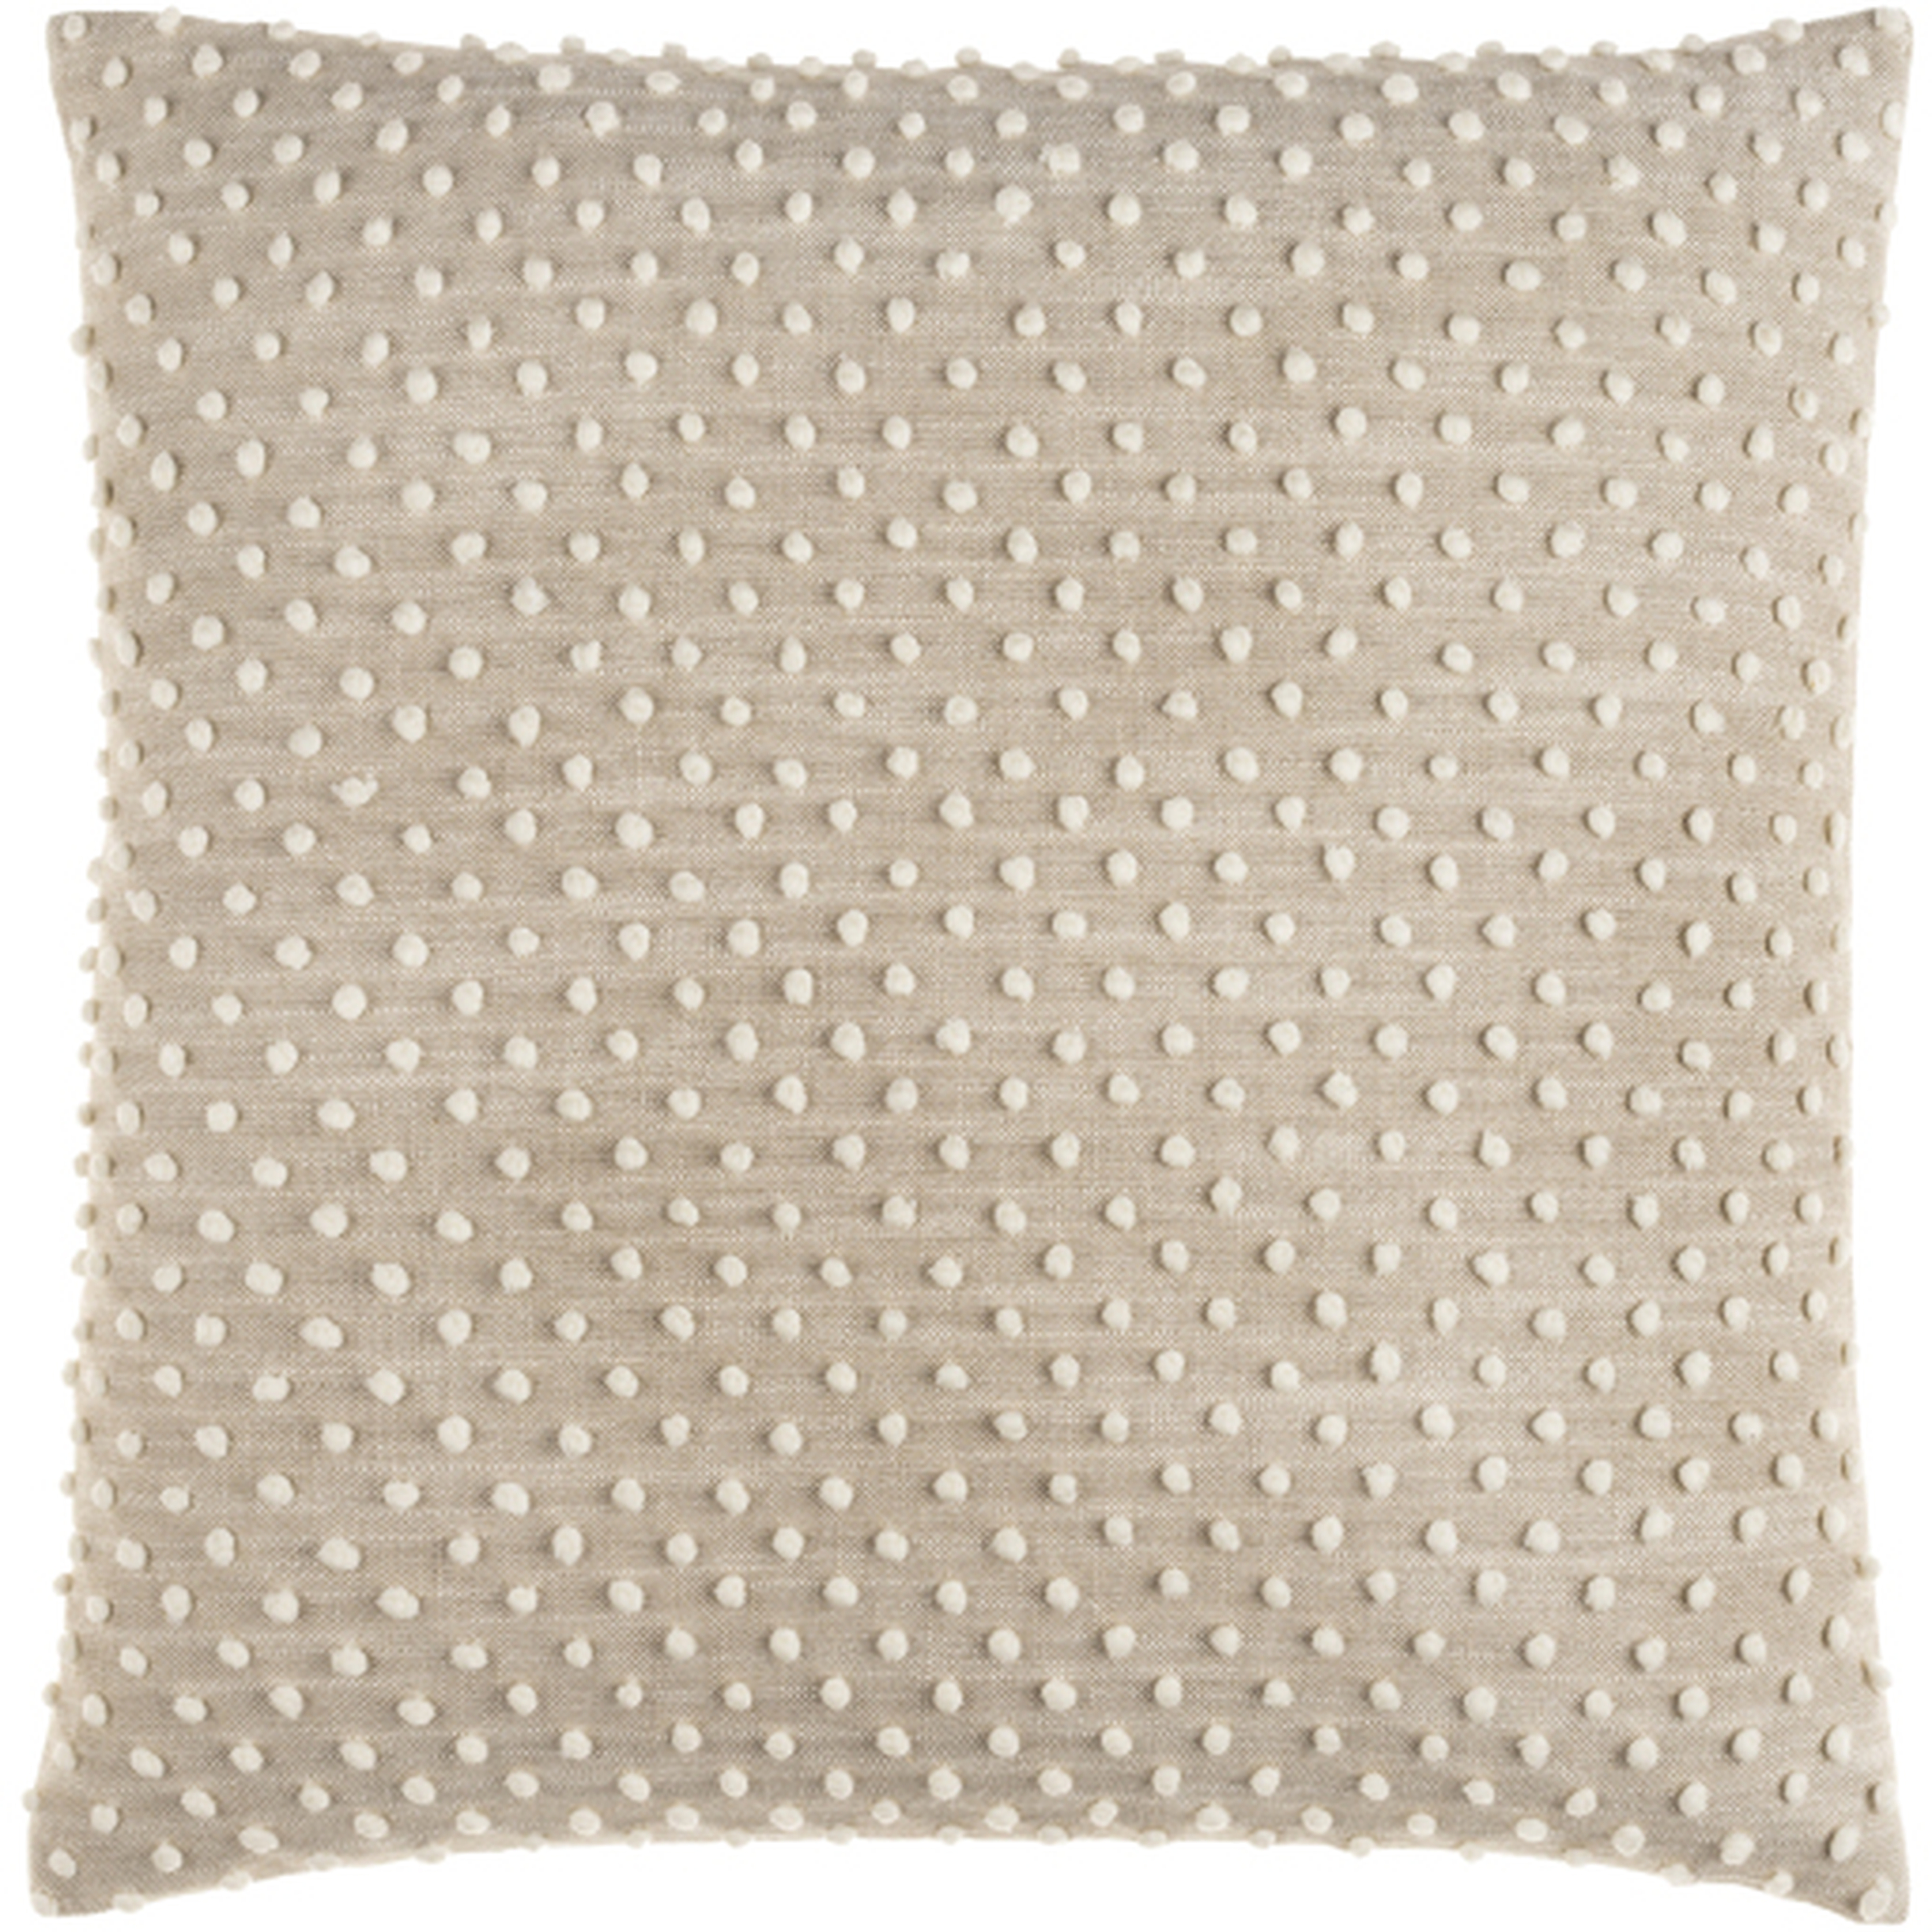 Valin Pillow, 18" x 18" with Polyester Insert - Surya